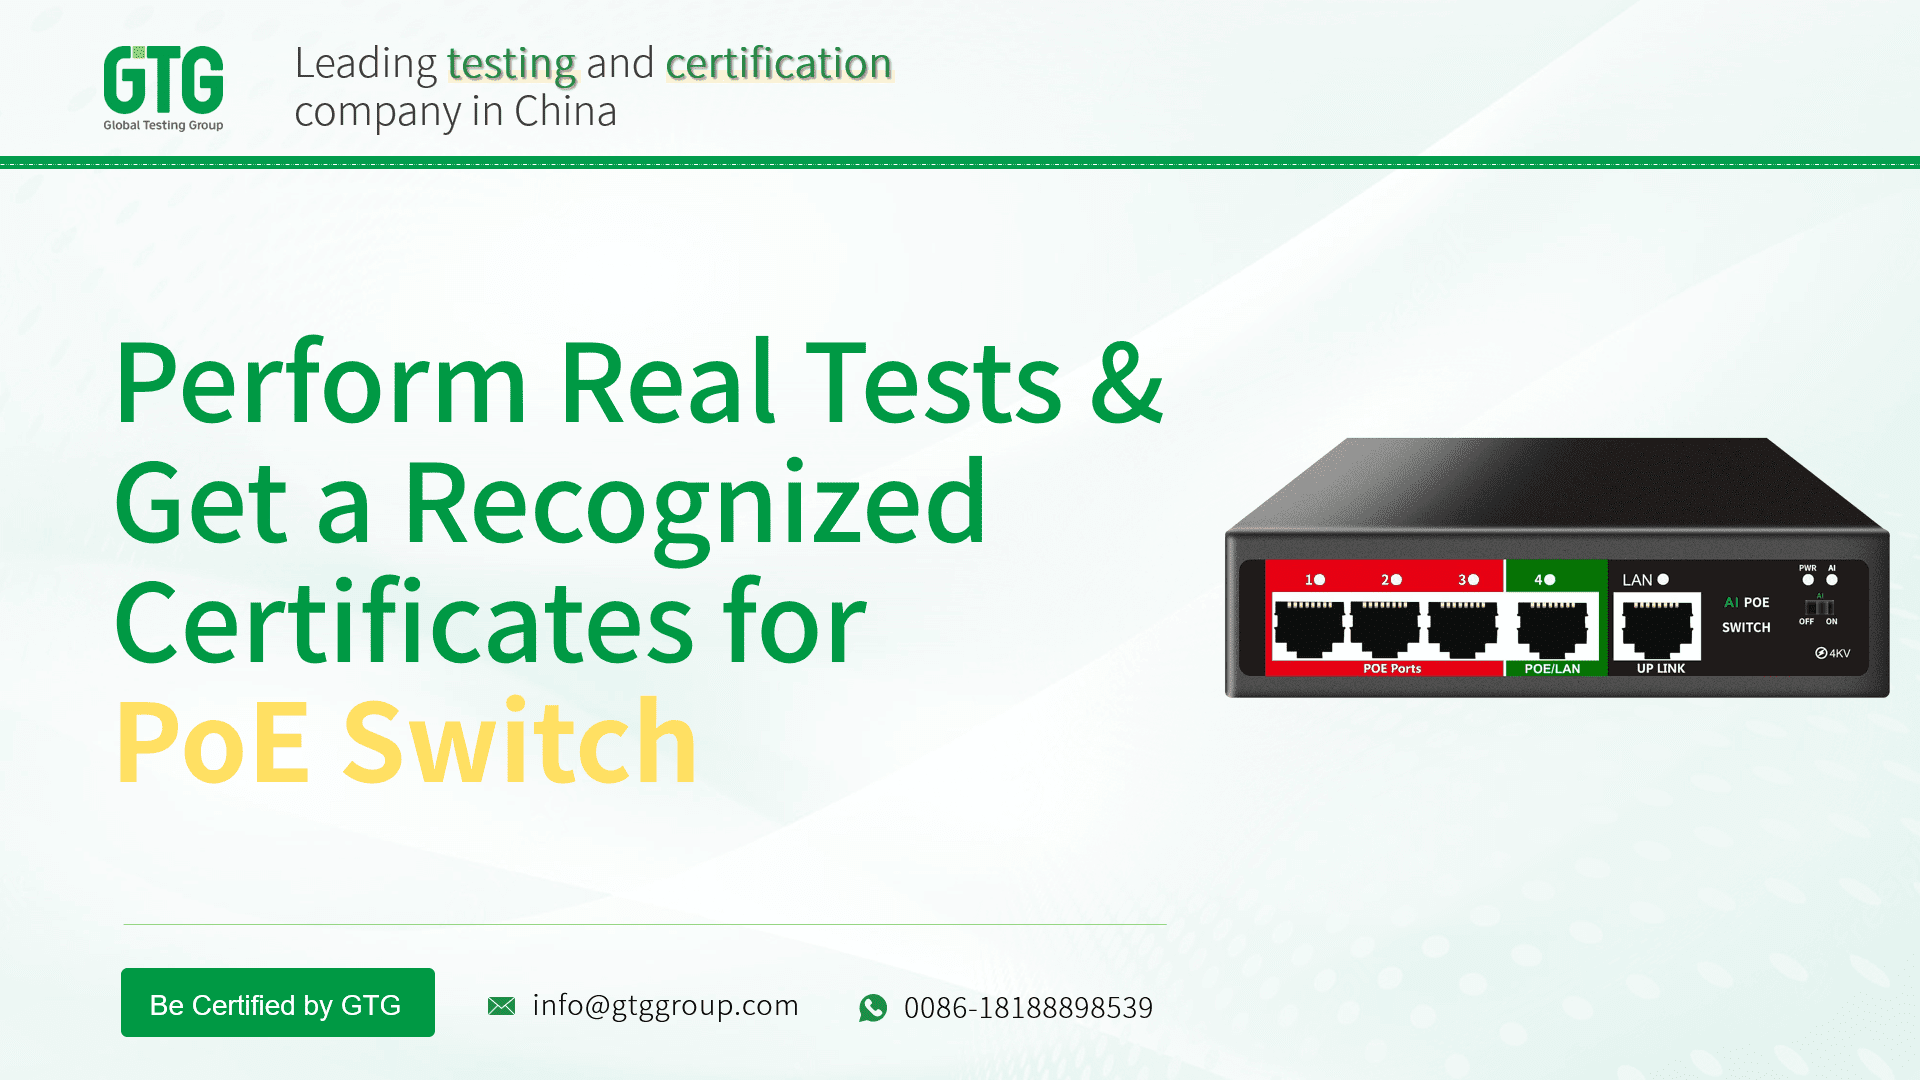 Get Test Report and Certifications for PoE Switch from GTG Group